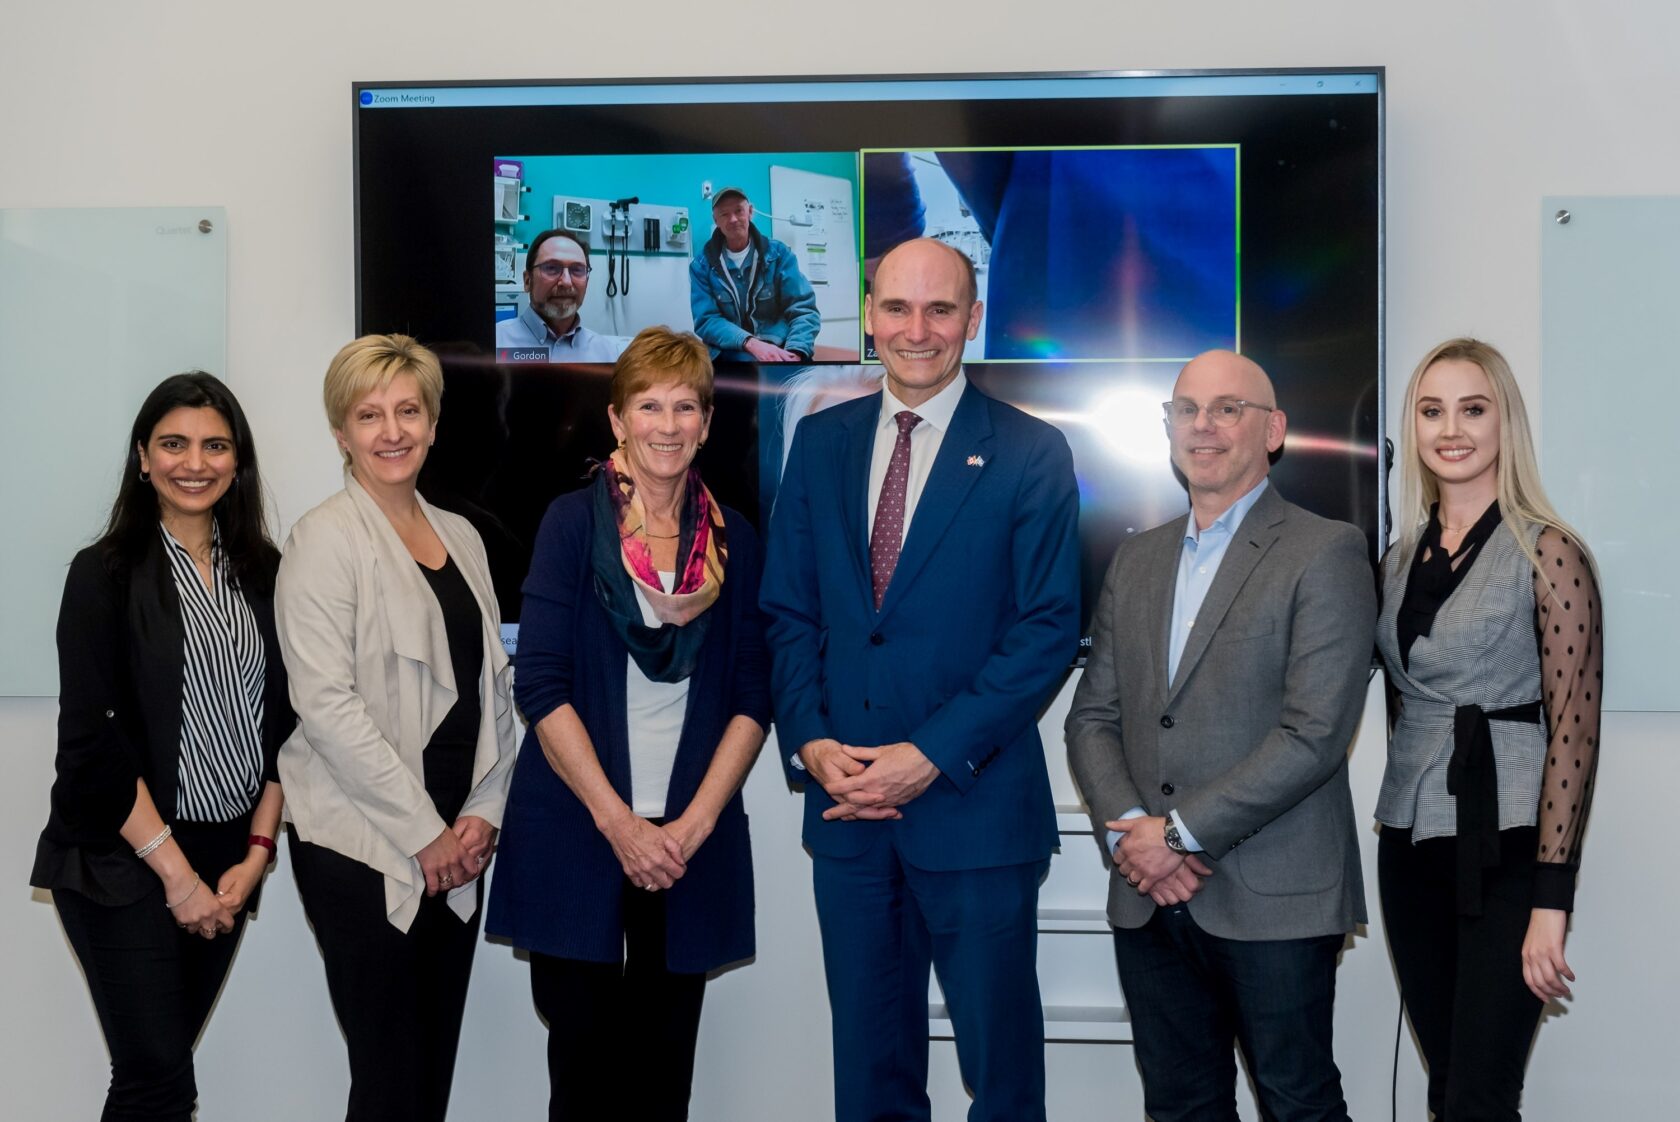 Minister of Health, the Honourable Jean-Yves Duclos visits Digital’s offices to learn more about ongoing healthcare project PoCUS.